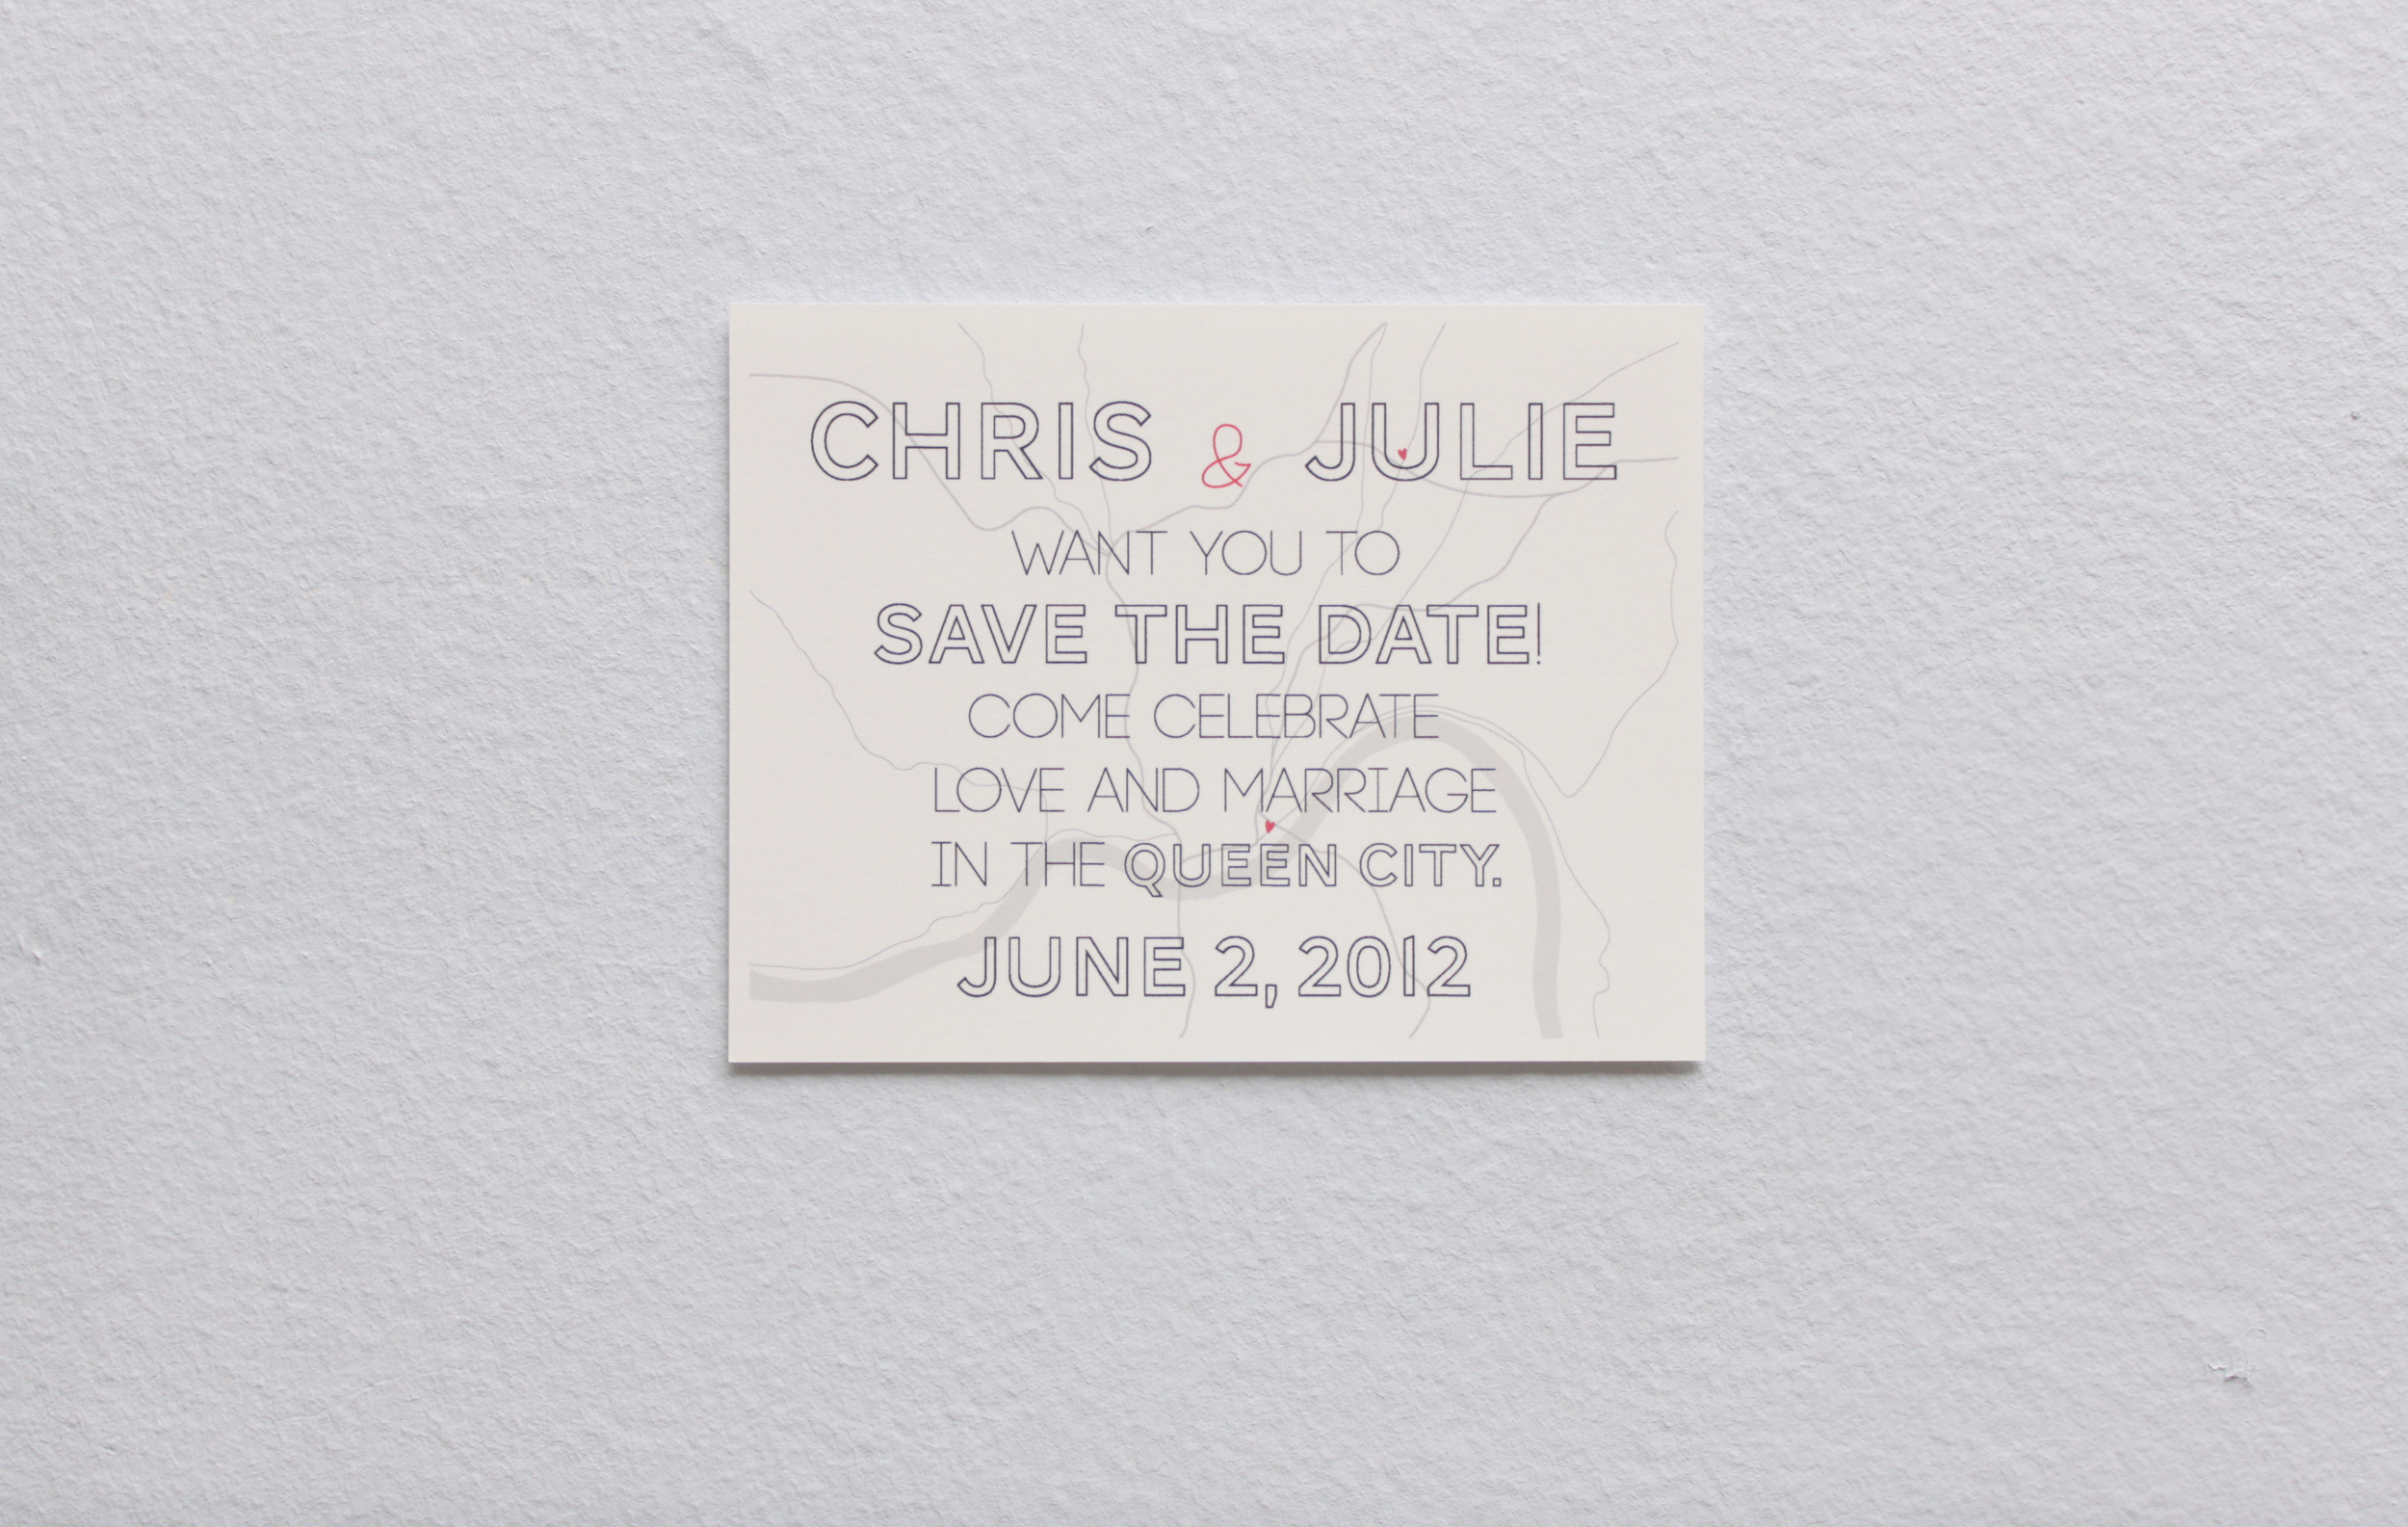  Image of a save the date card 